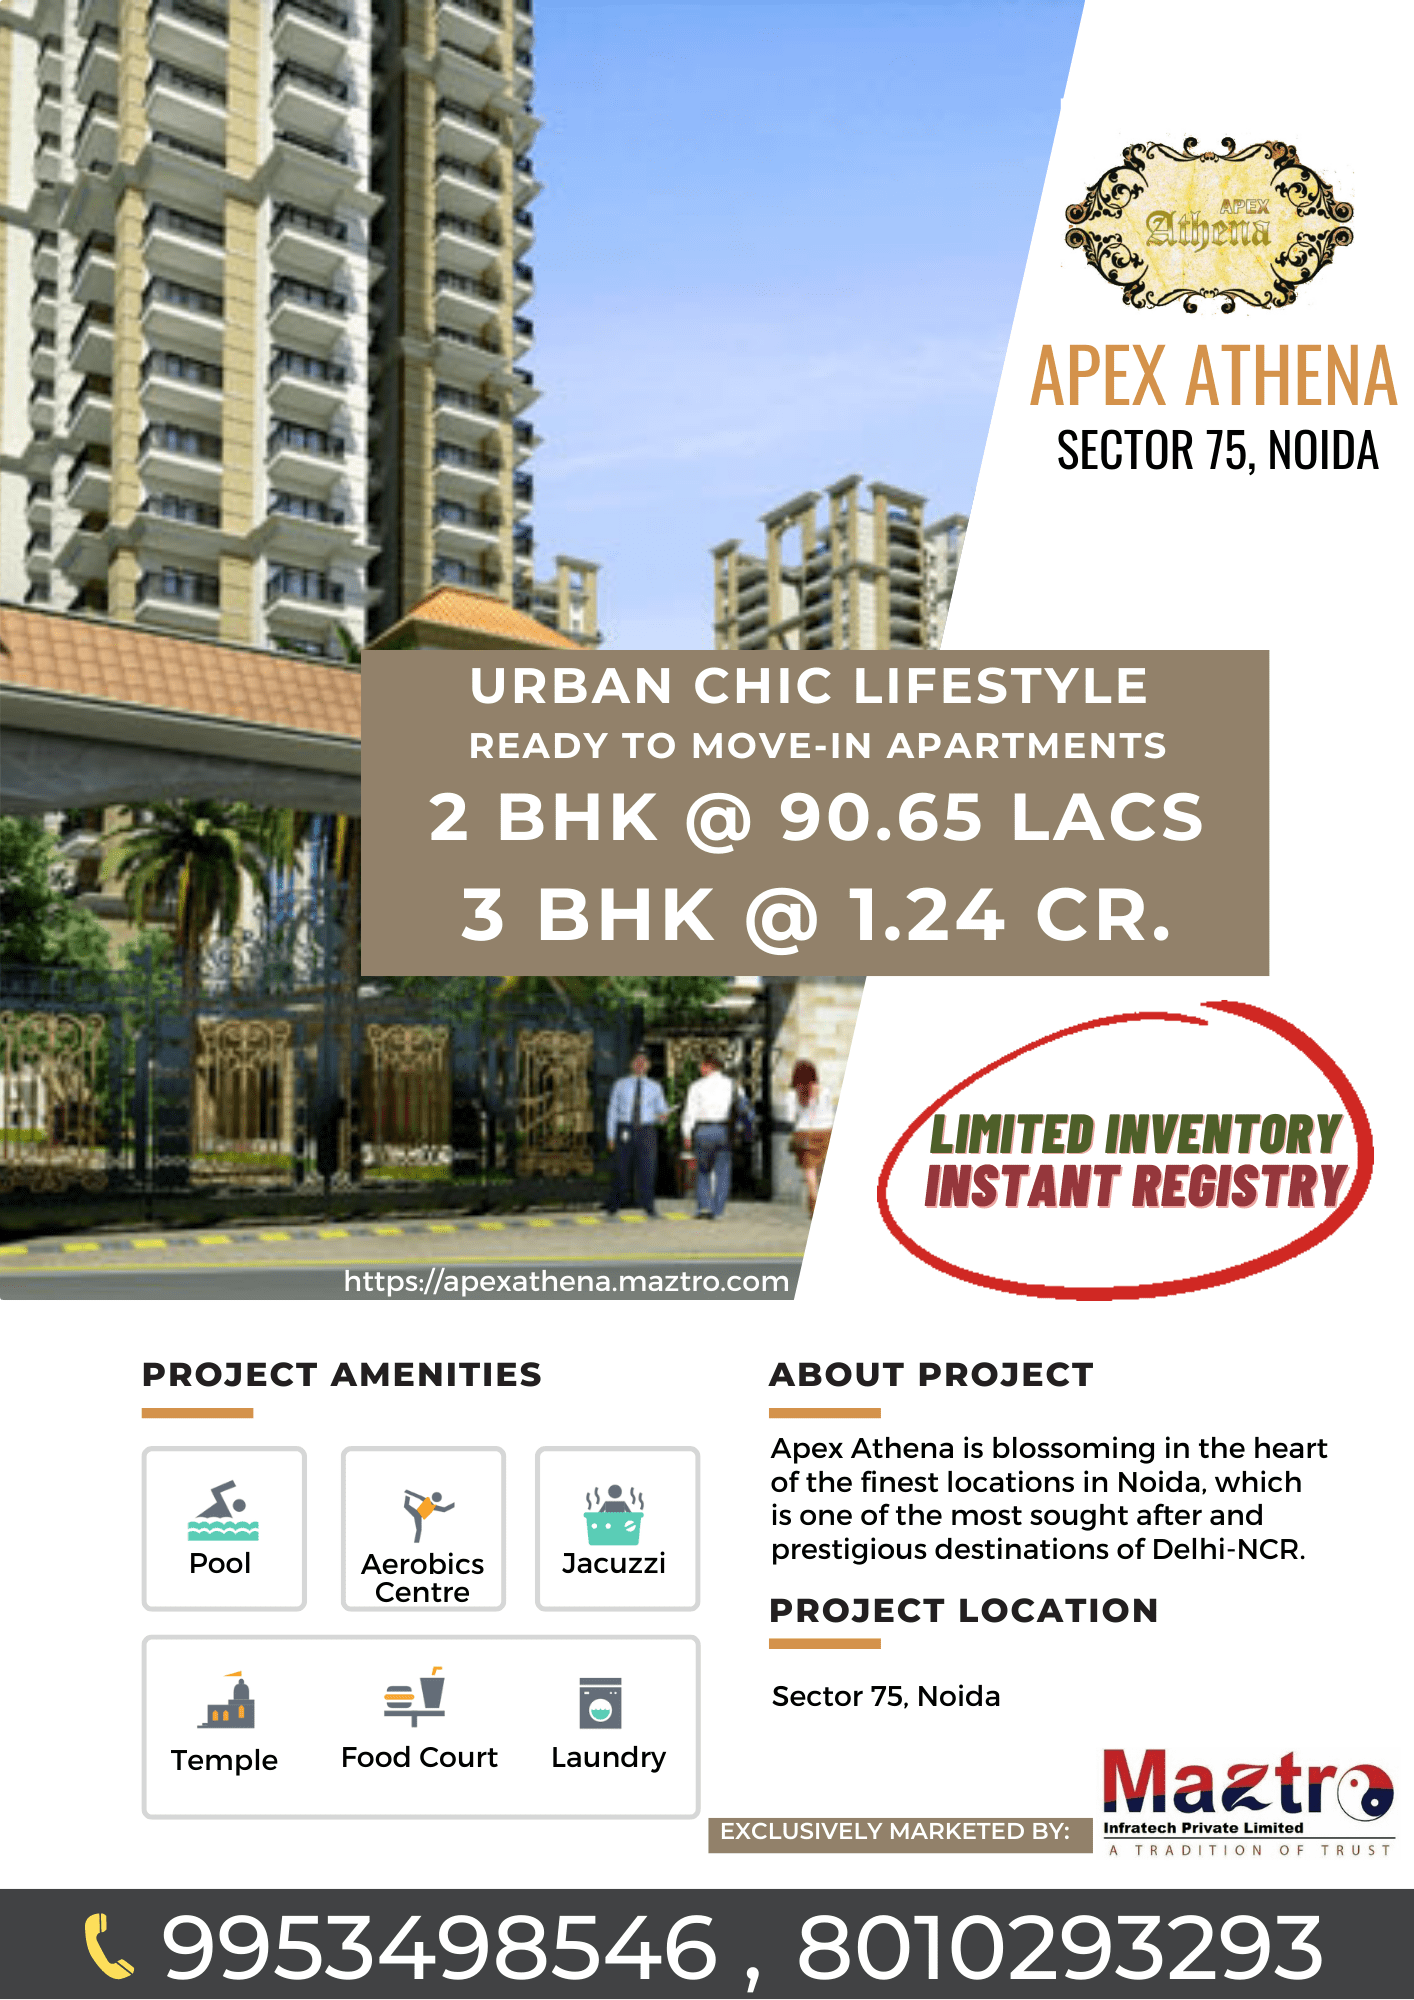 2 BHK Flat for sale in only Rs. 90.65 Lacs at Apex Athena Sector 75 Noida | Best Deal Guaranteed by Maztro Infratech